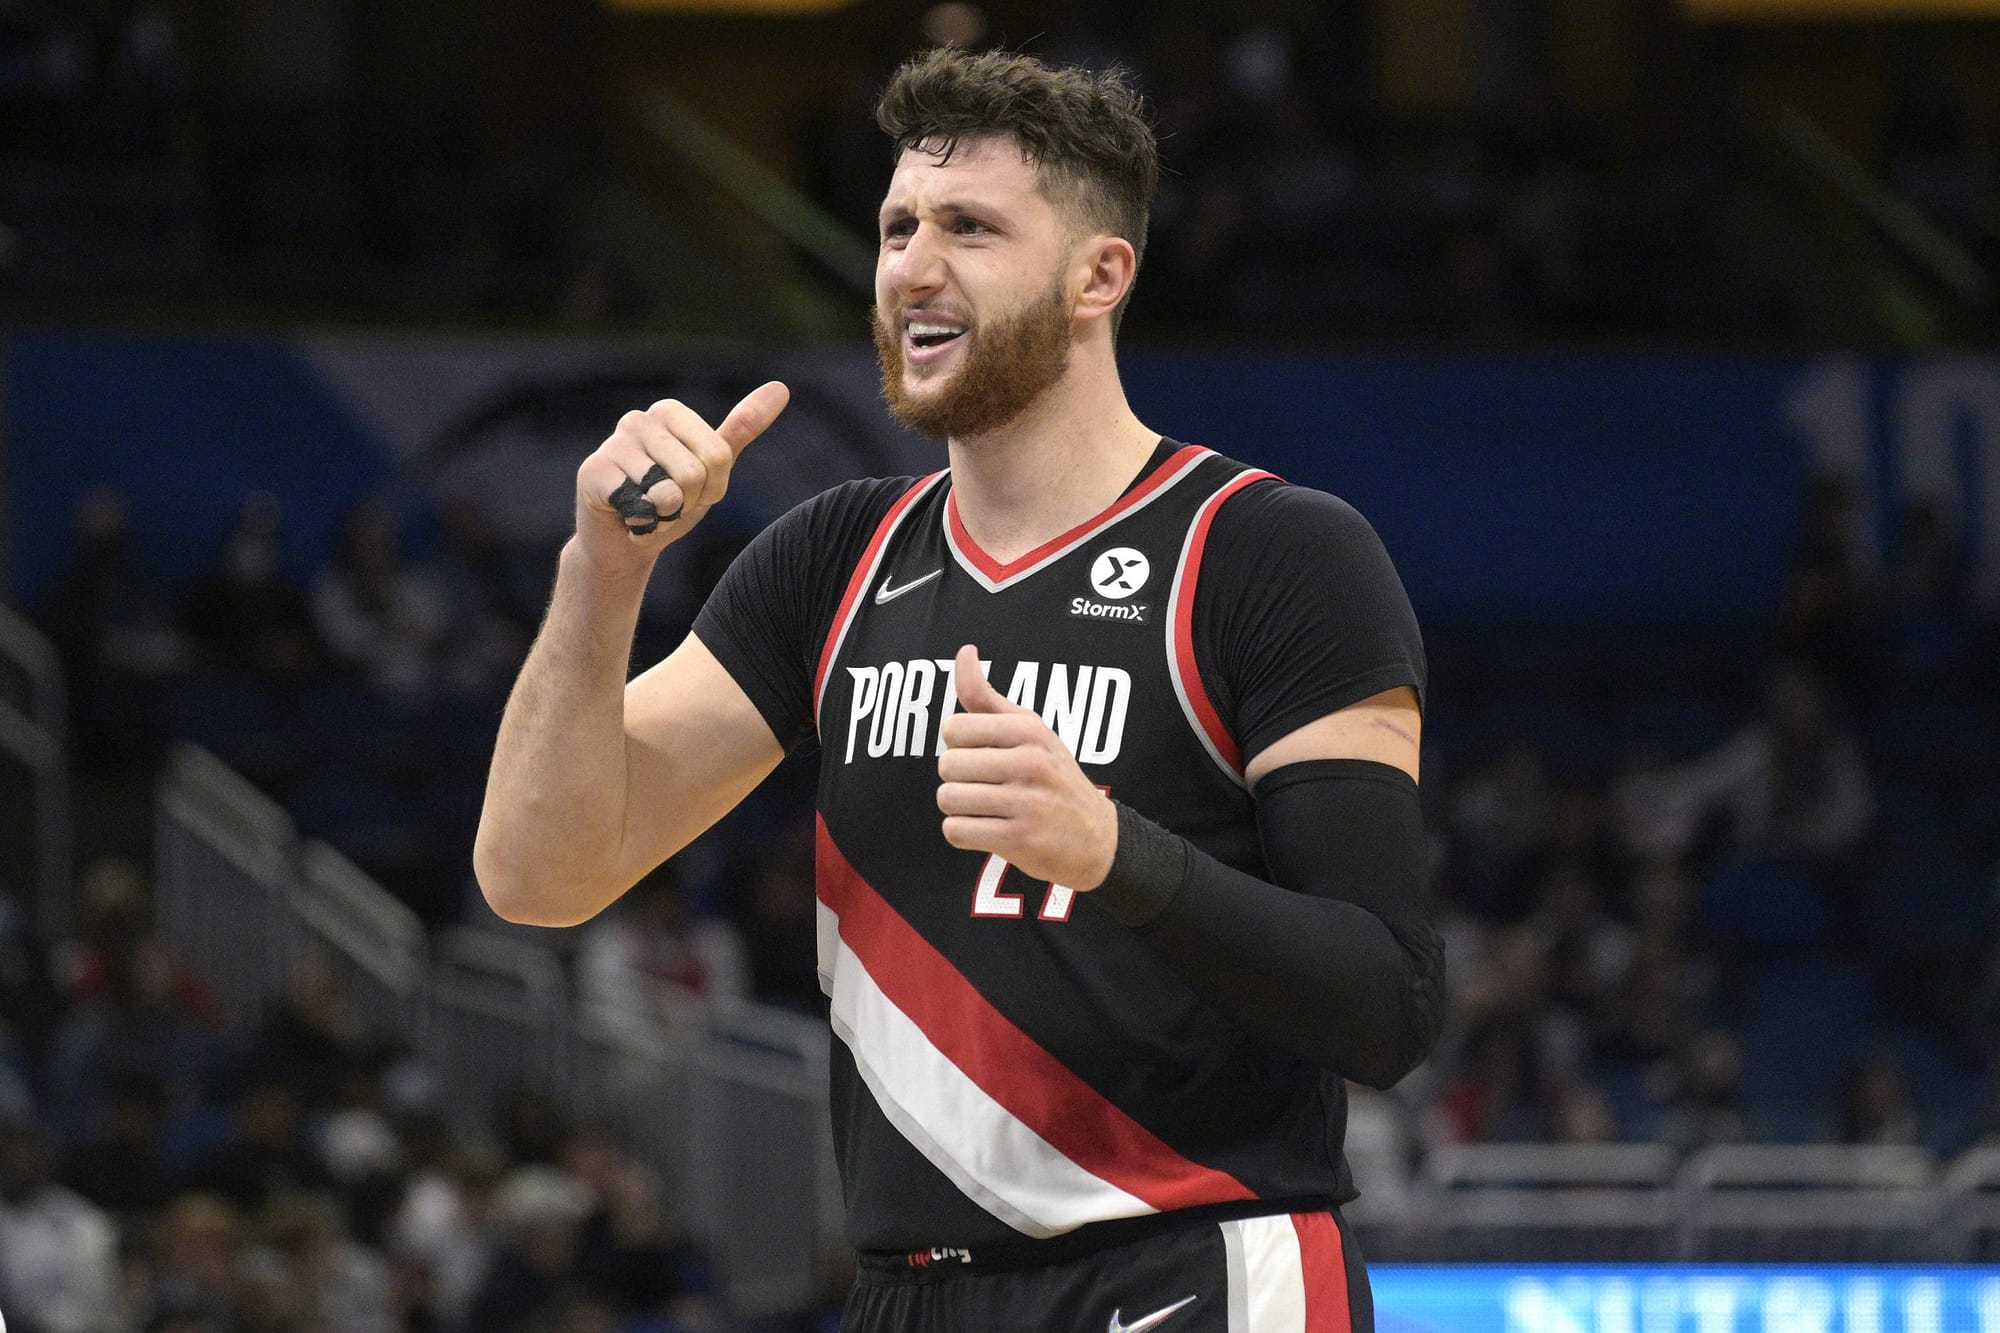 The Trail Blazers take on the Spurs on Monday night, and one NBA player prop that stands out involves Jusuf Nurkic's scoring...